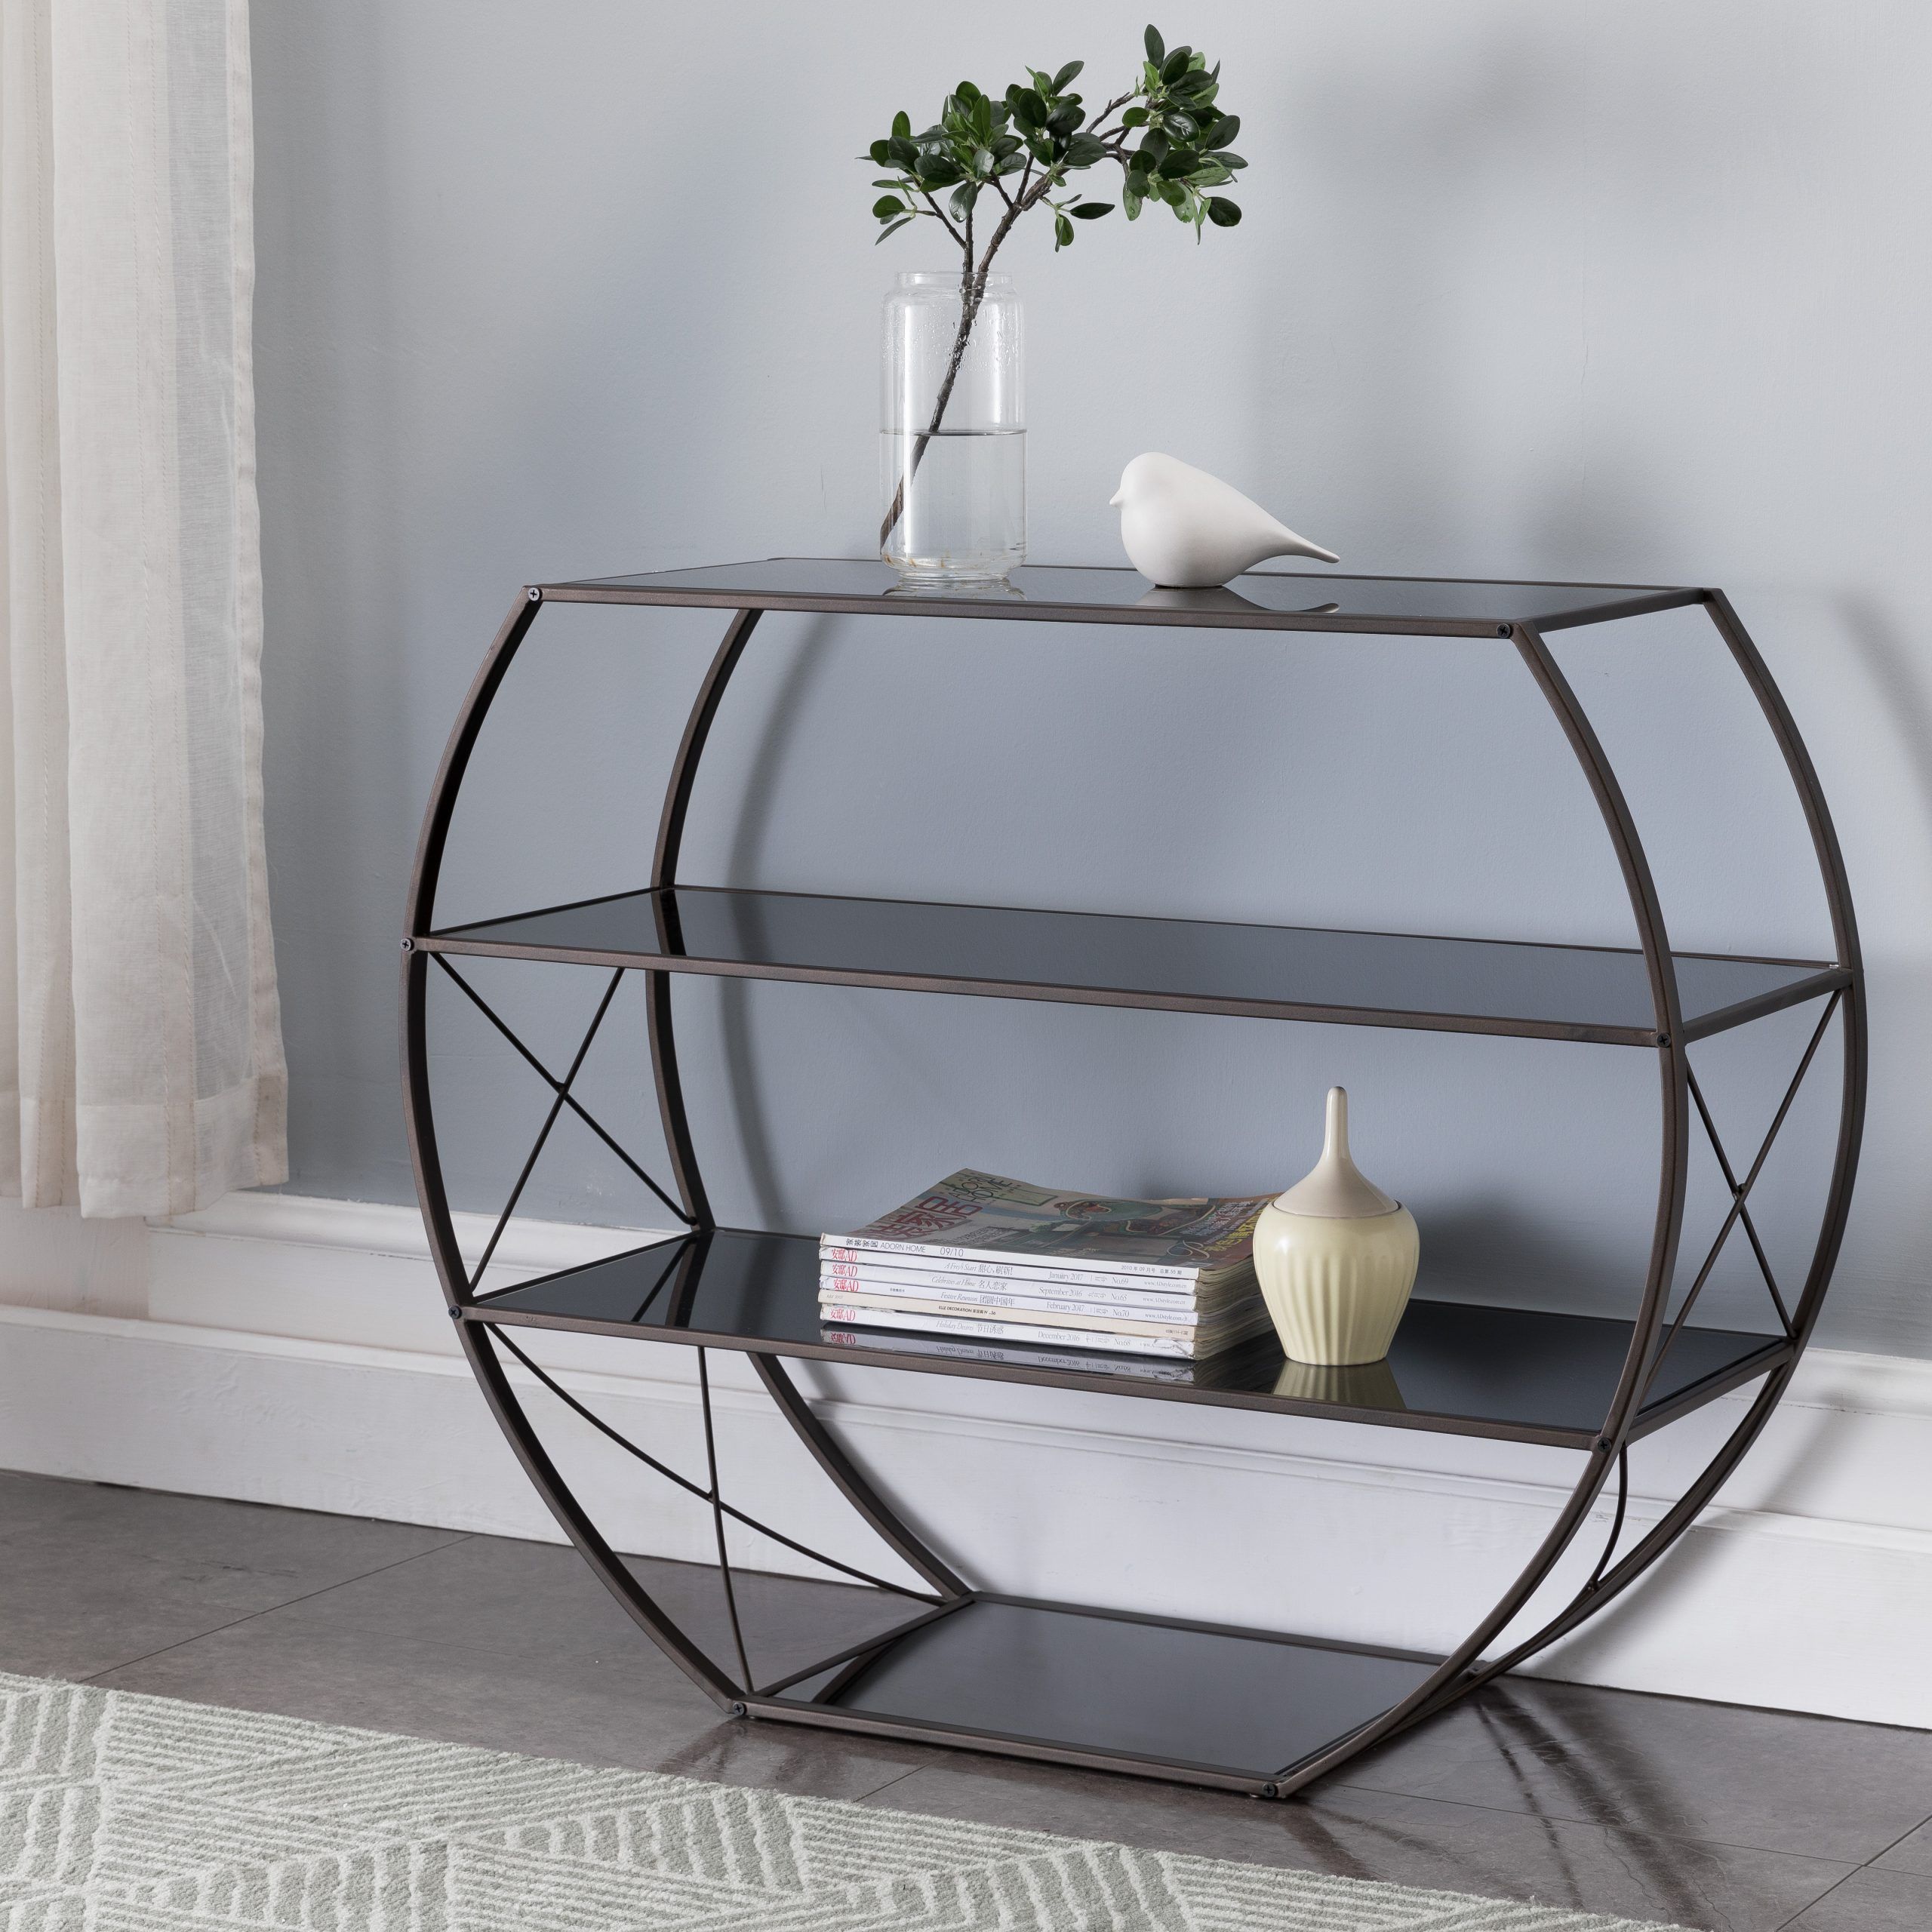 Ennio Metal / Glass Console Table – 2kfurniture For Glass Console Tables (View 16 of 20)